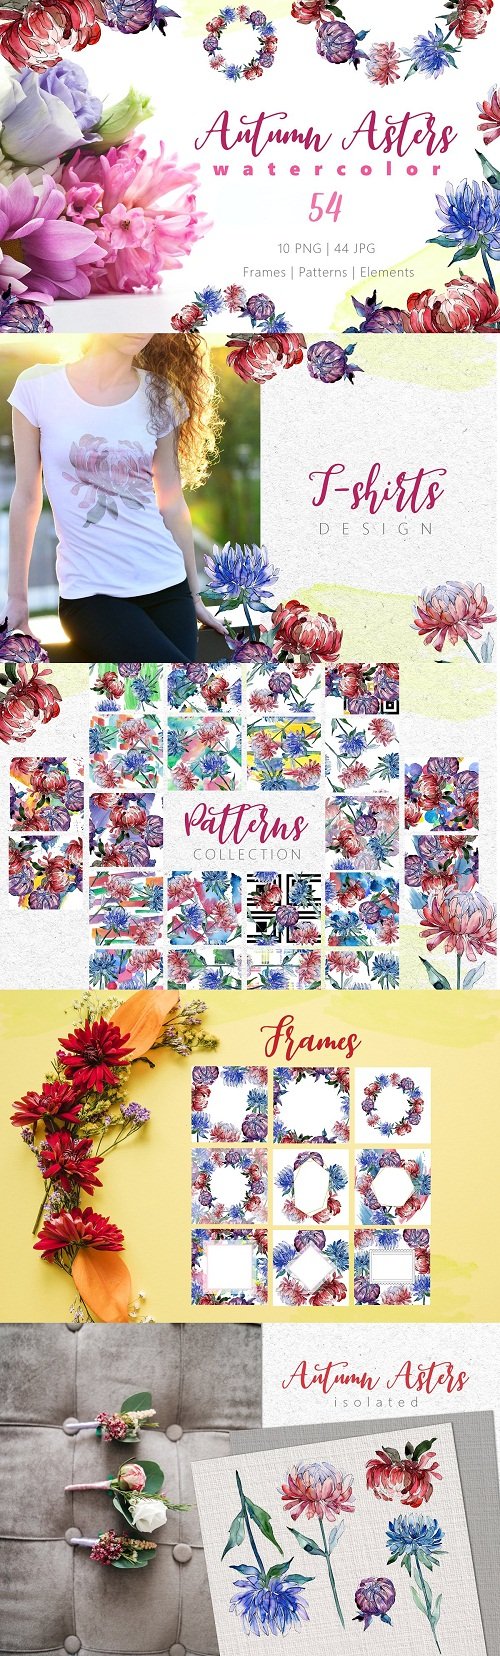 Autumn Asters Watercolor png - 3453032